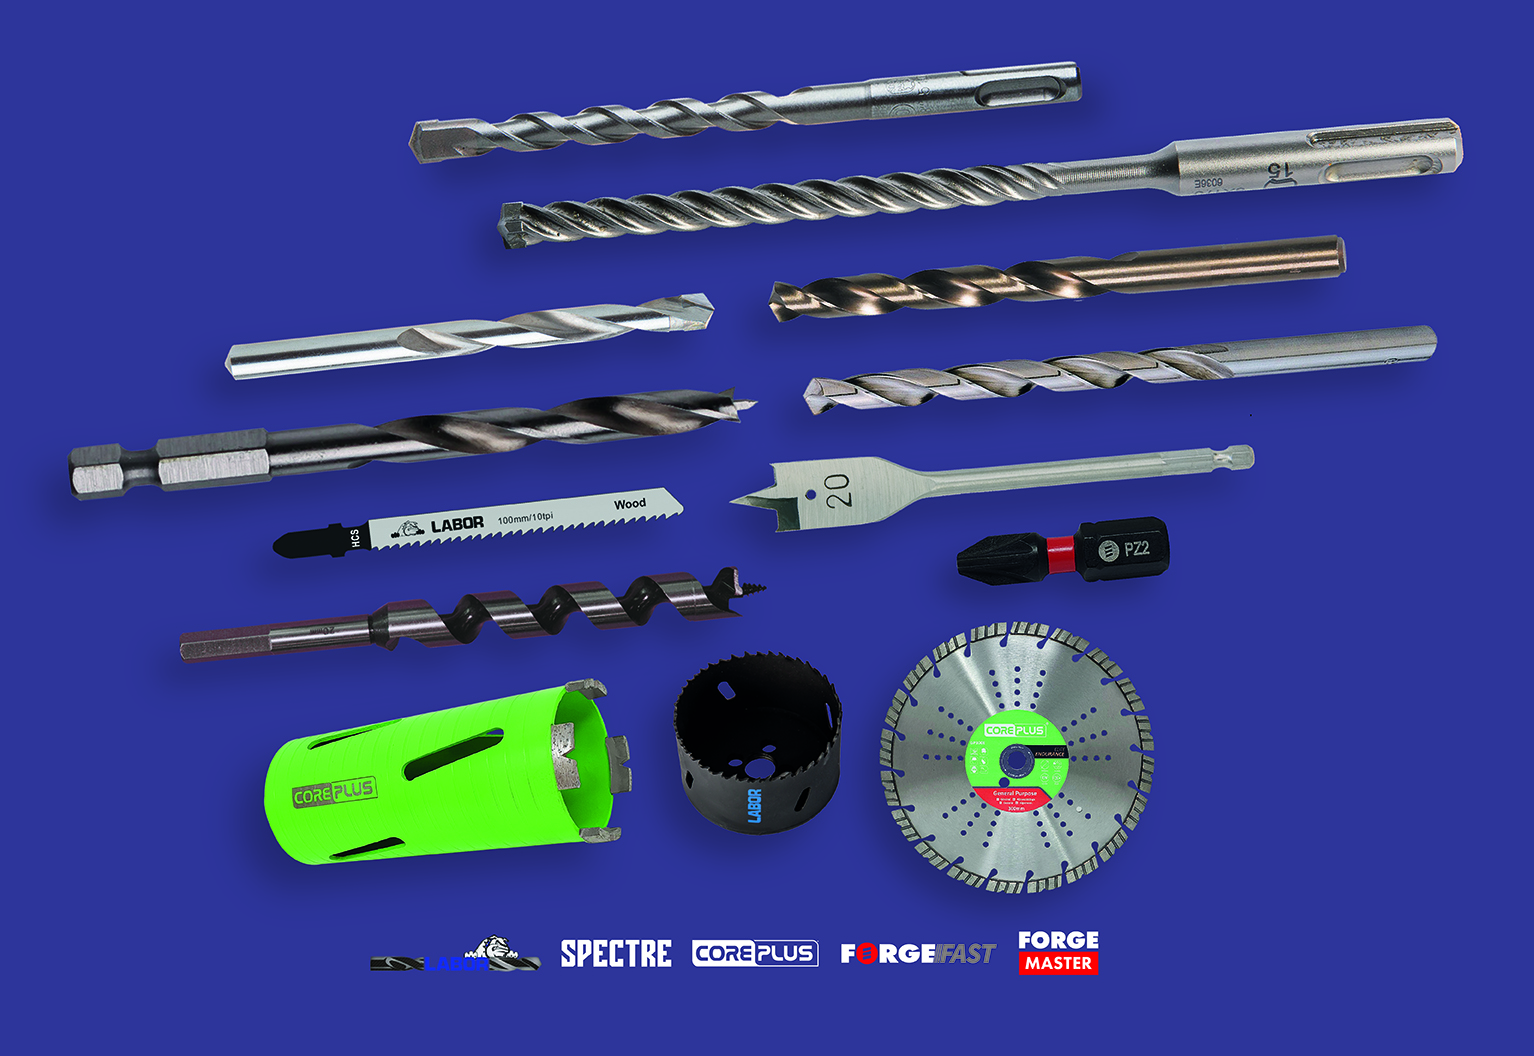 ForgeFix has launched a new portfolio of power tool accessories, designed to be stocked and sold through merchants across the country.